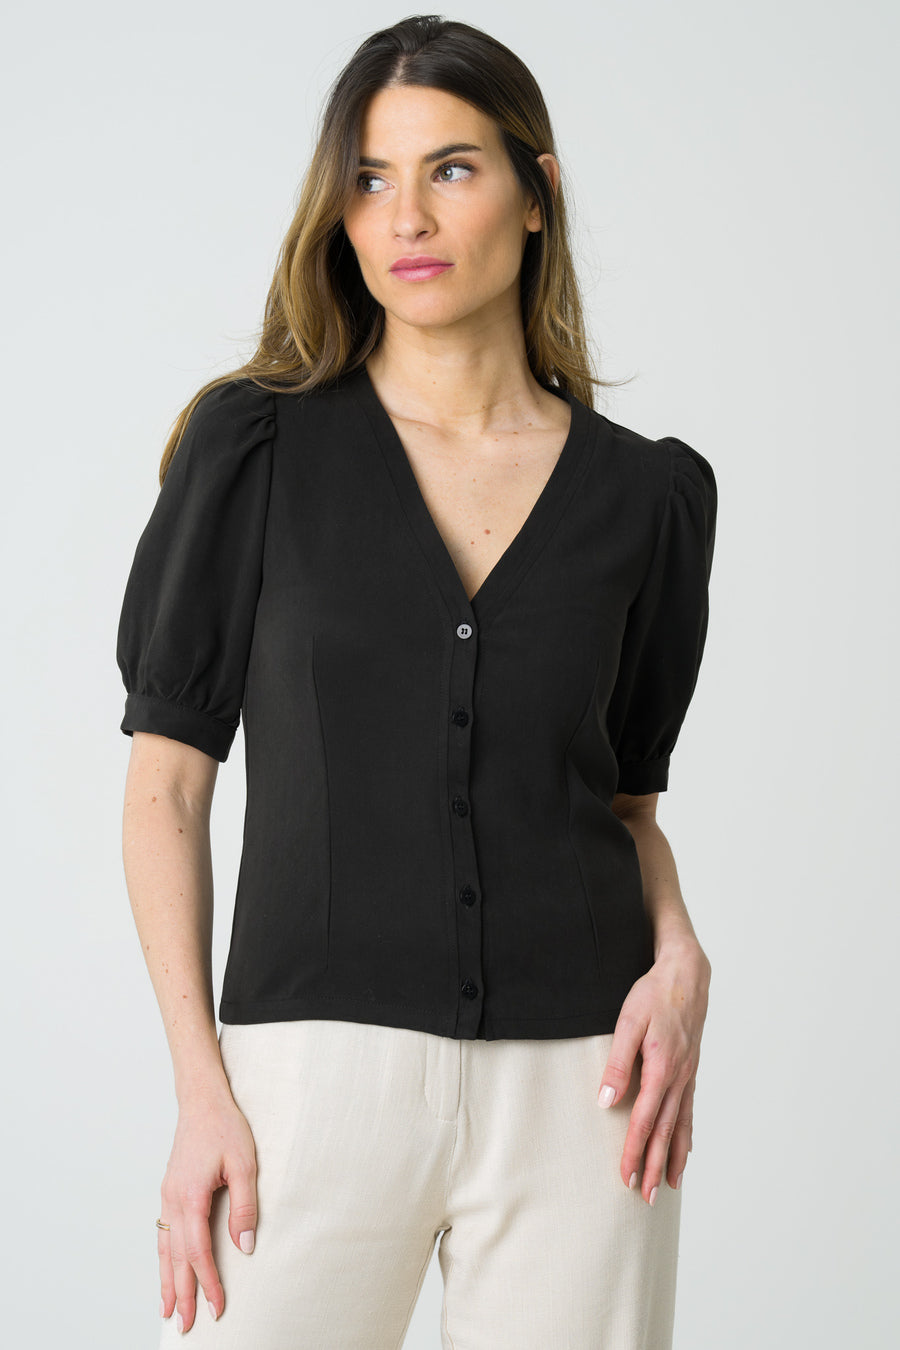 Black blouse Aster made of 100% Tencel by Avani